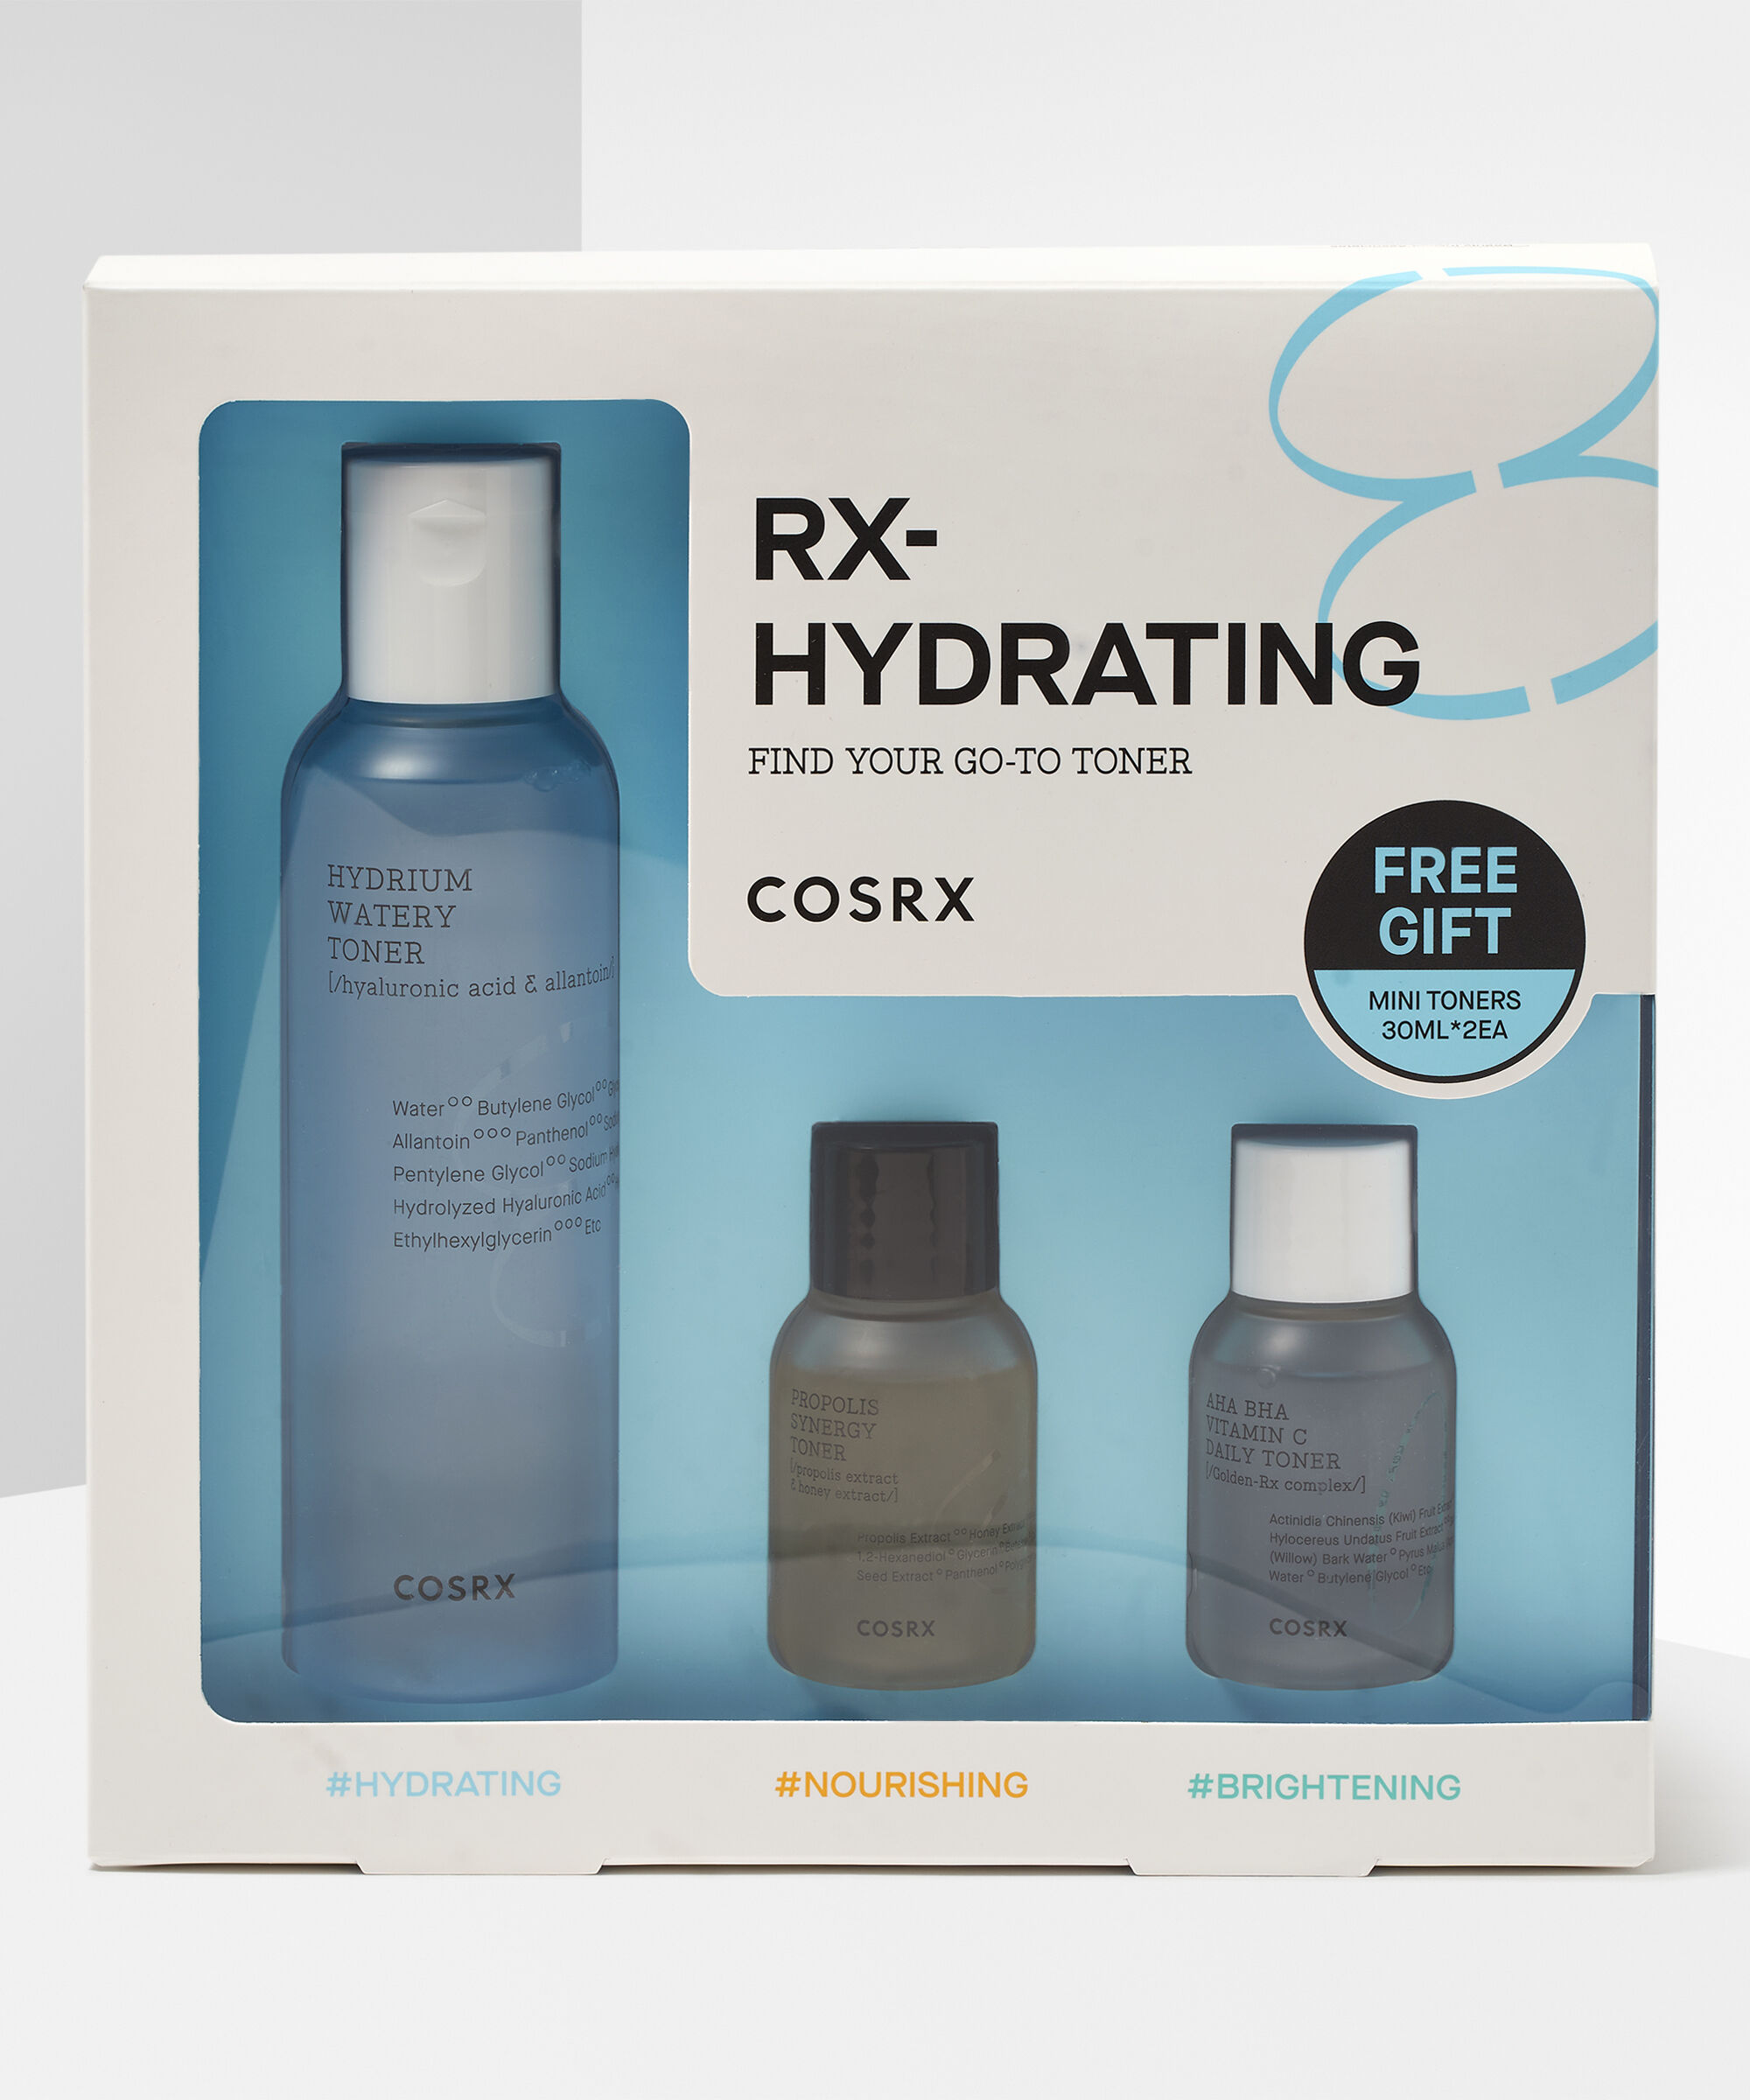 COSRX - RX Hydrating Find Your Go To Toner